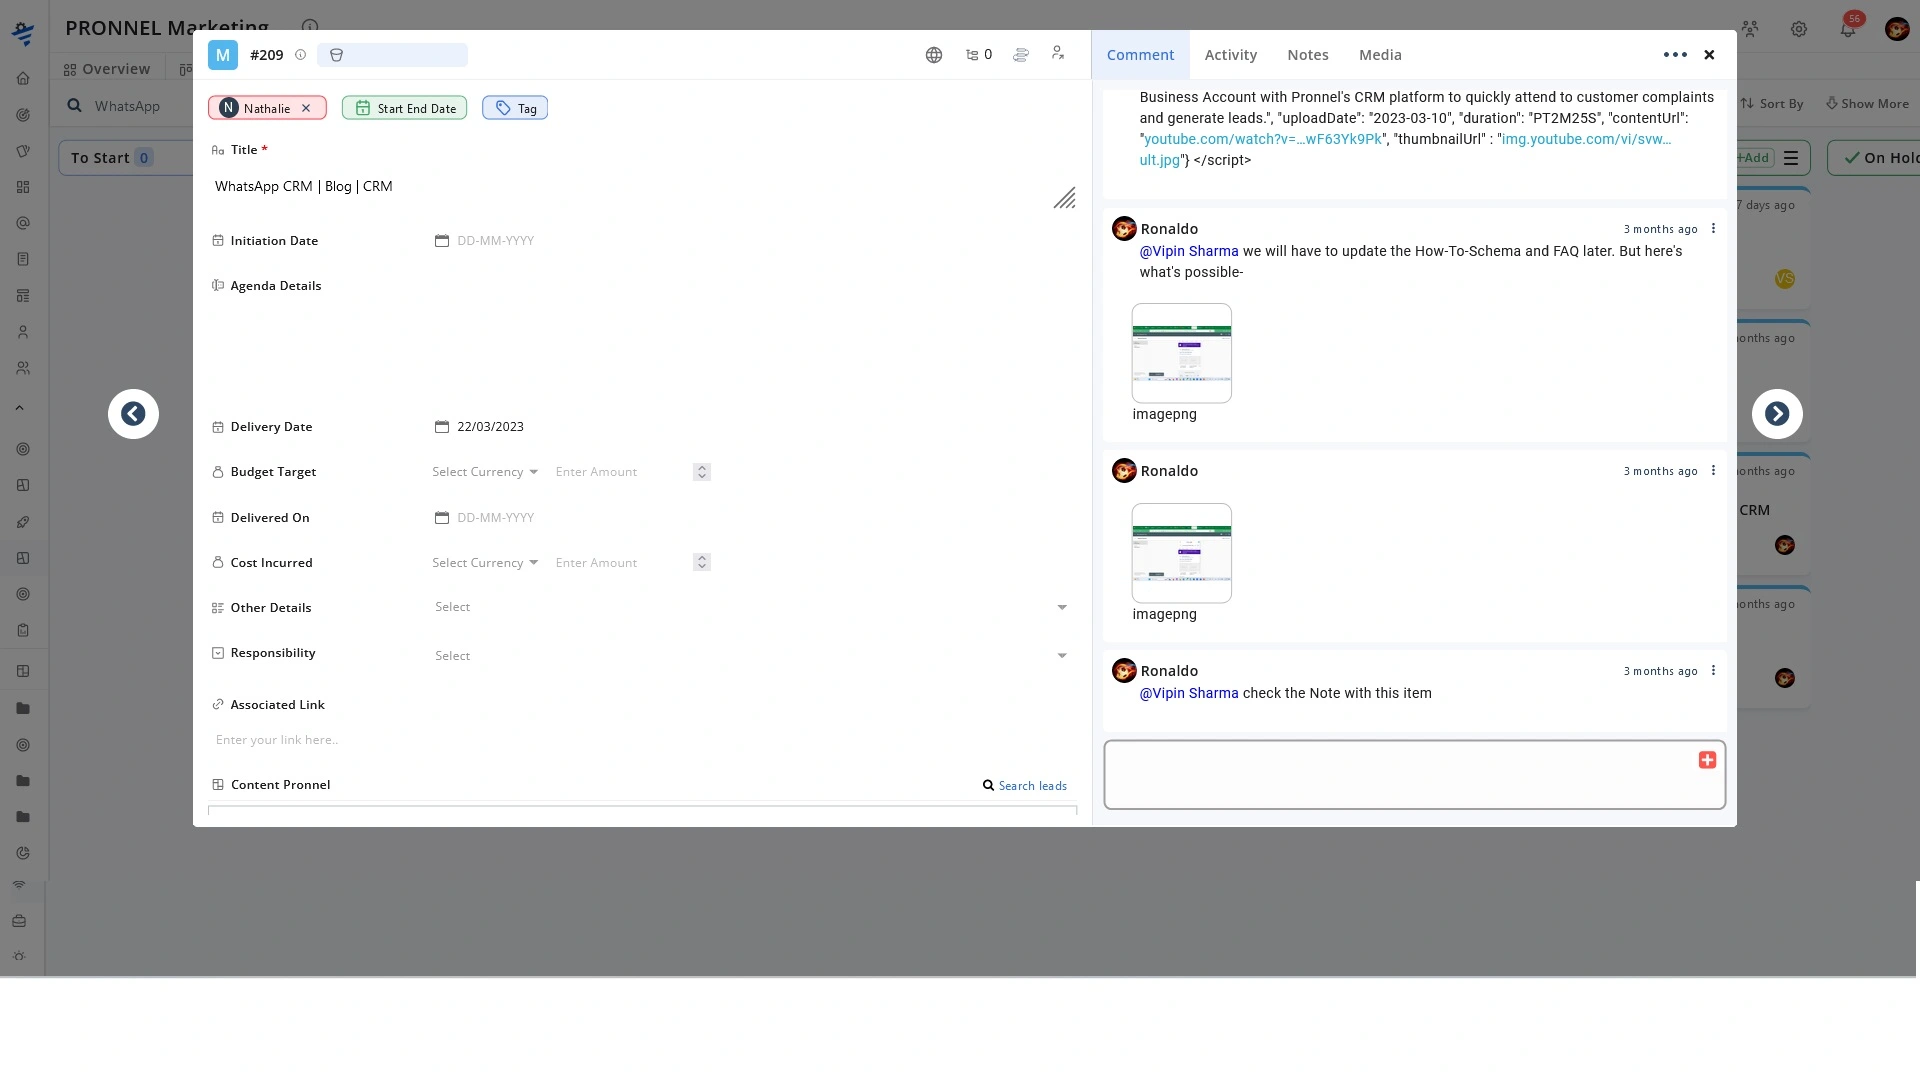 Commenting, Share Inputs on Tasks, Collaboration